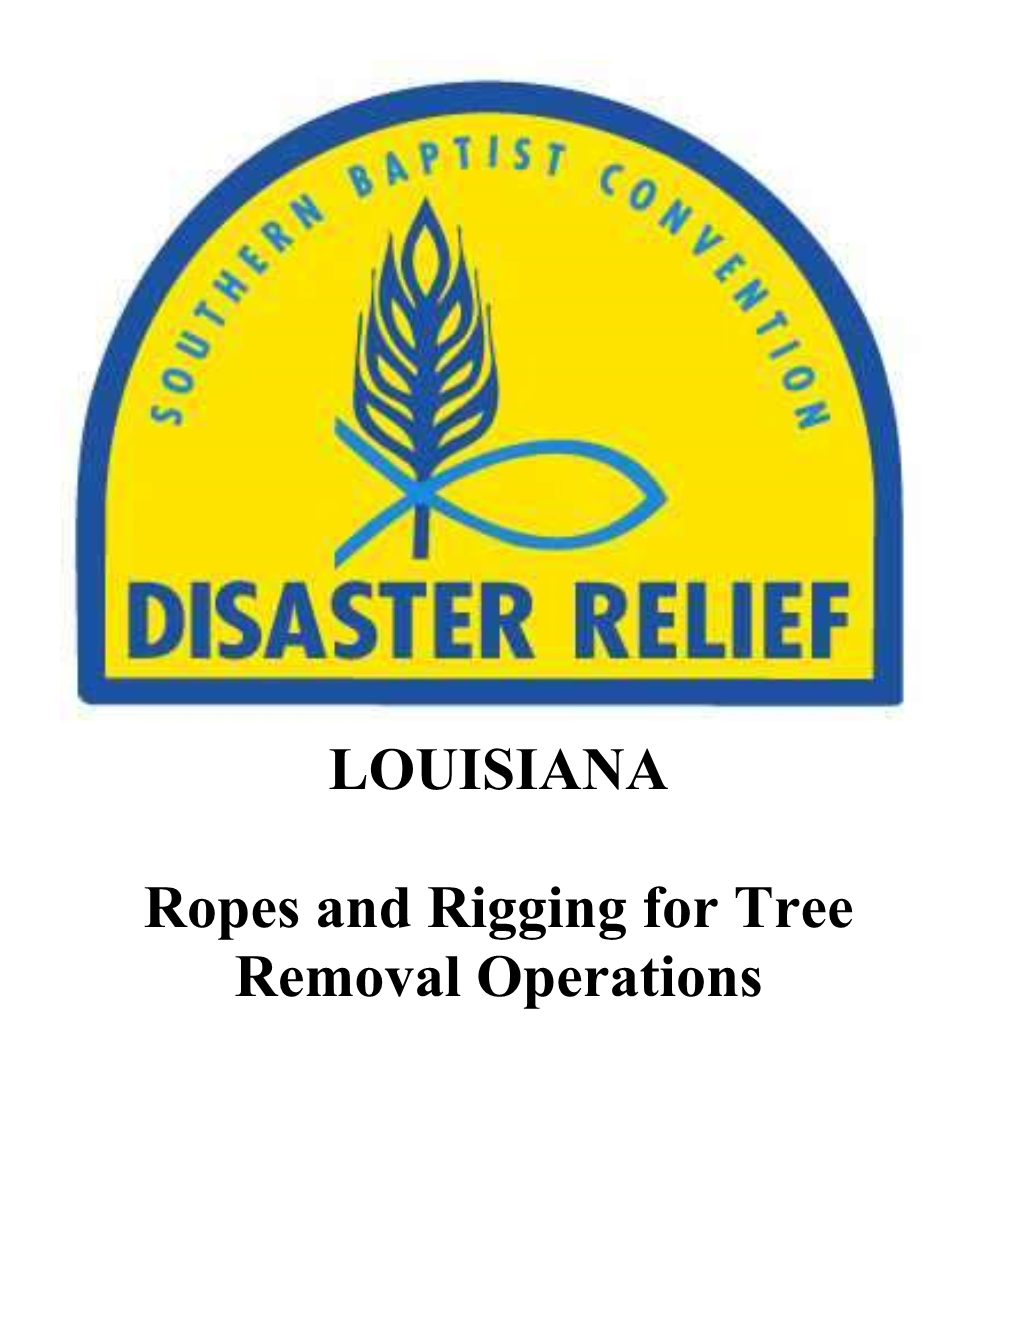 LOUISIANA Ropes and Rigging for Tree Removal Operations